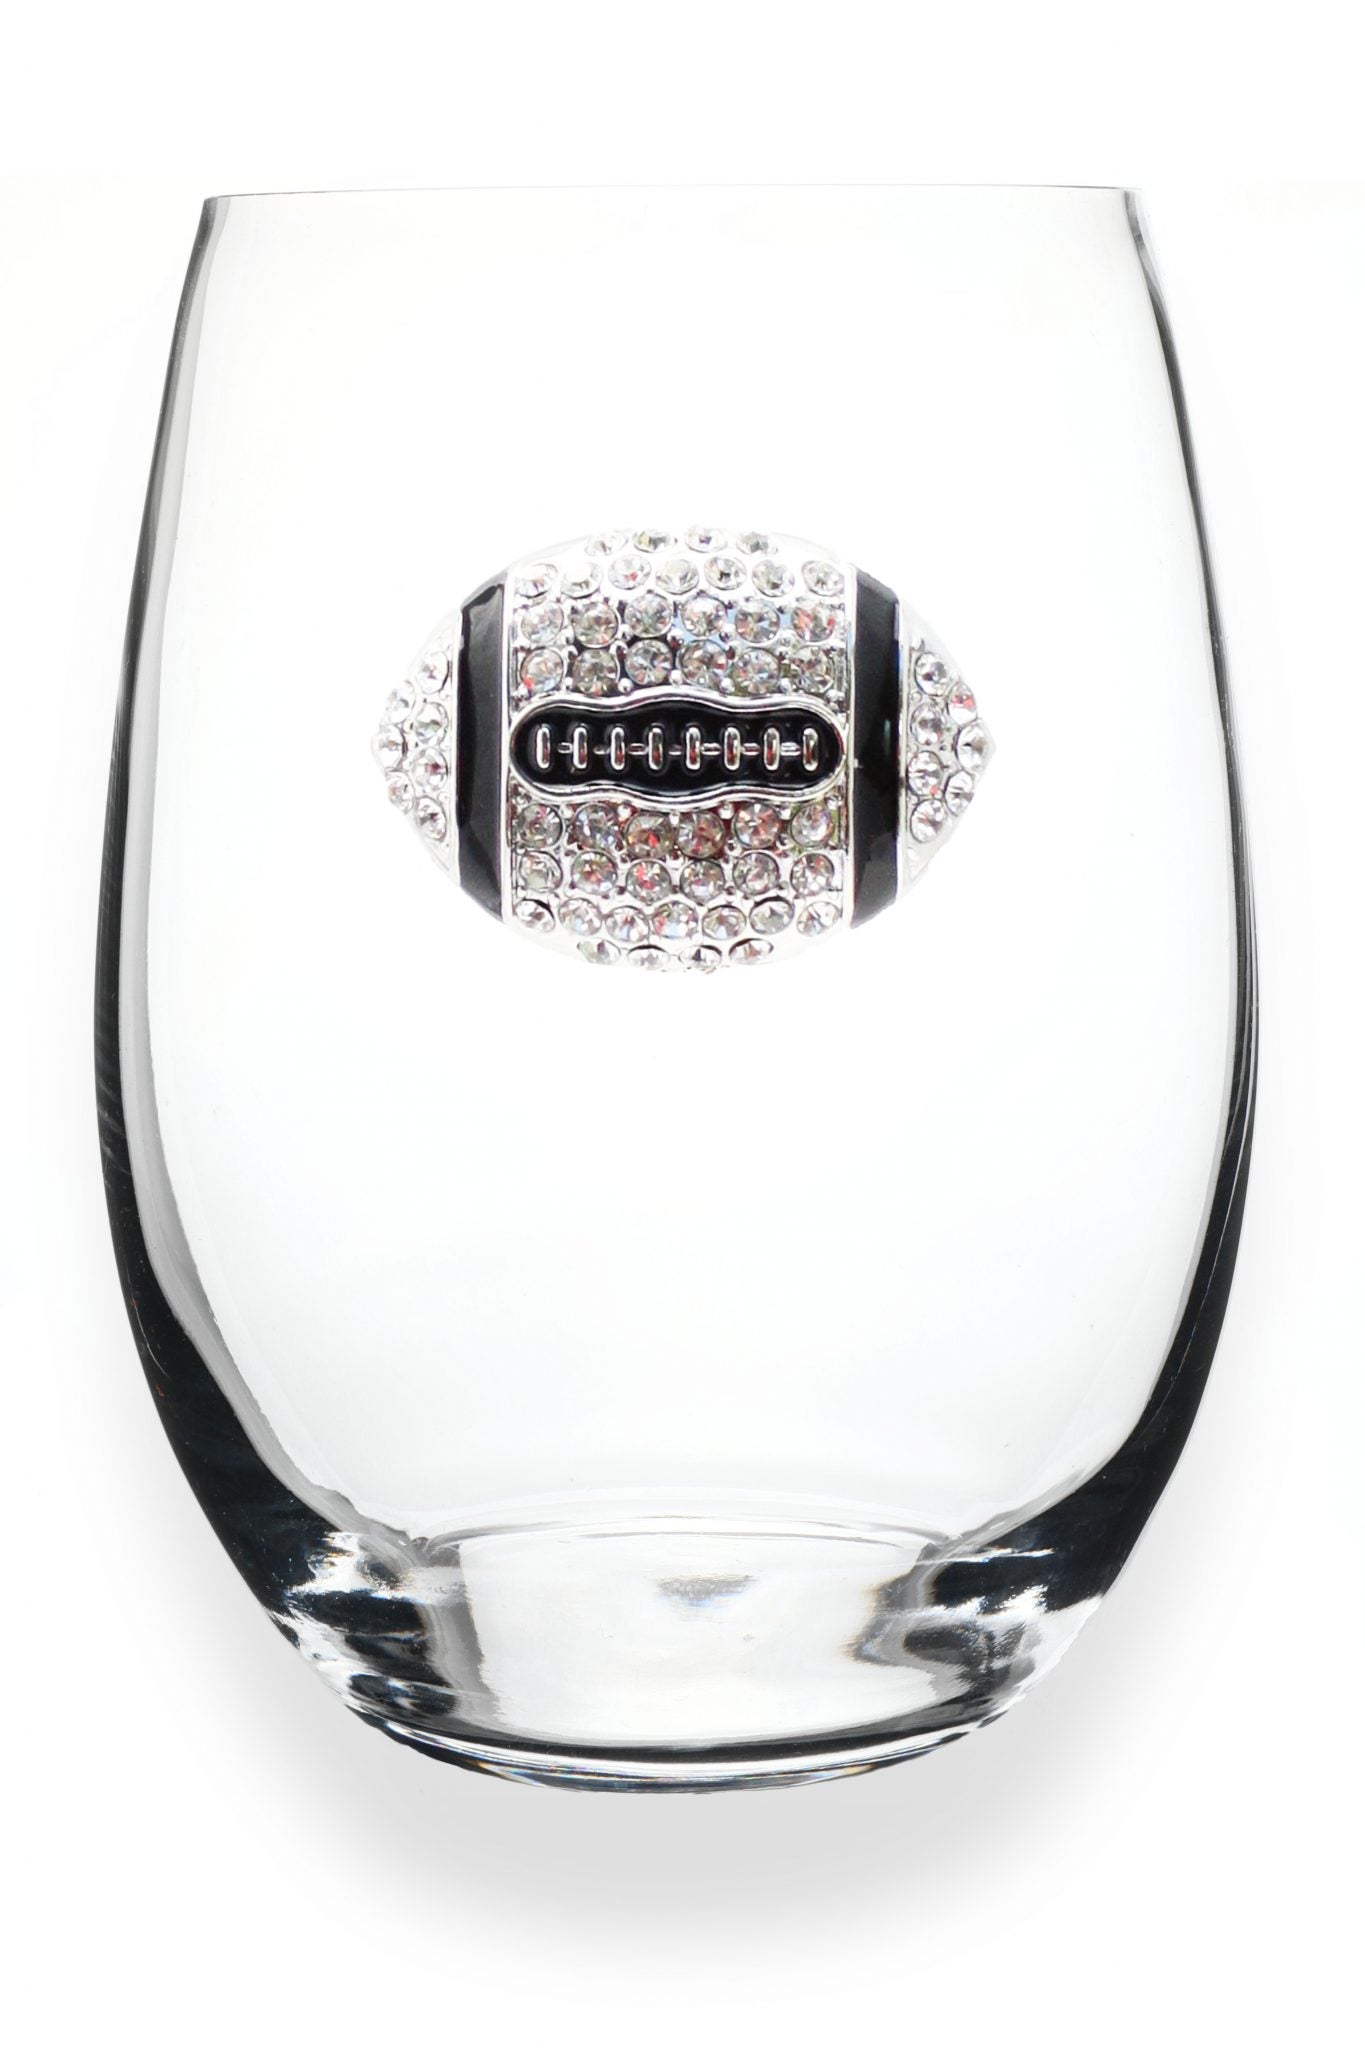 The Queens’ Jewels stemless glassware